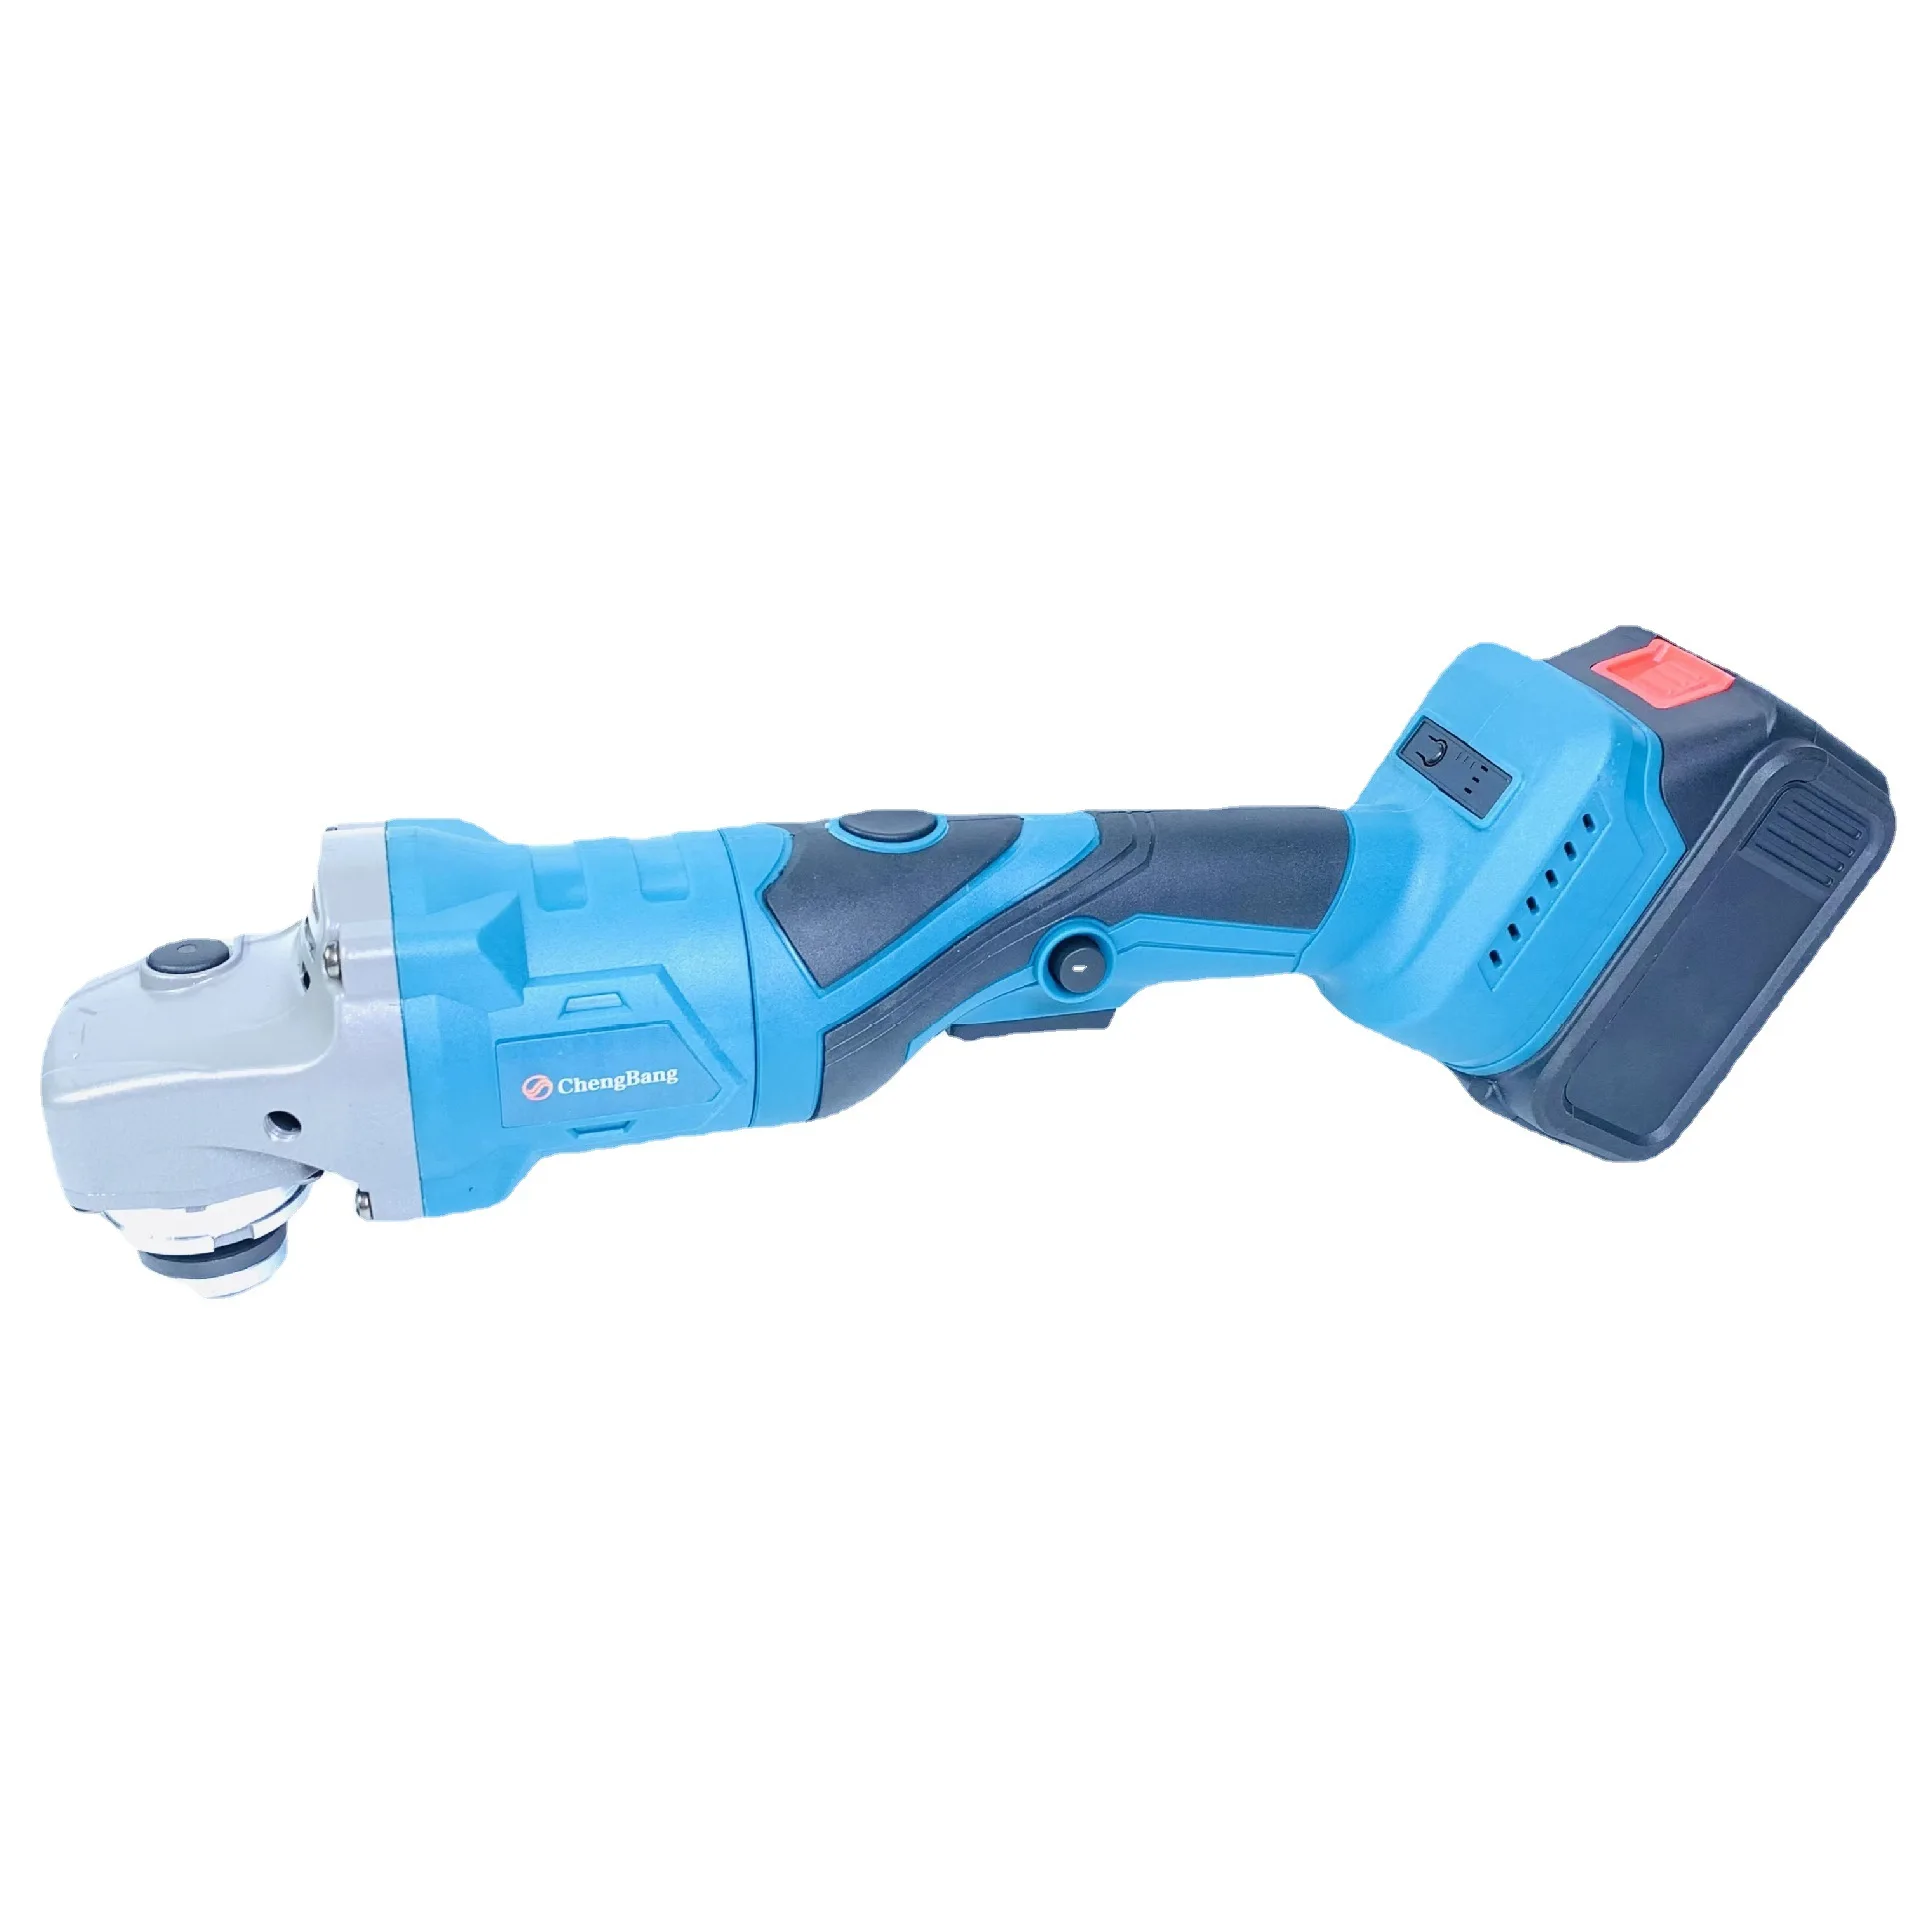 

100 type brushless lithium electricity rotation Angle grinder 02 Makita Battery